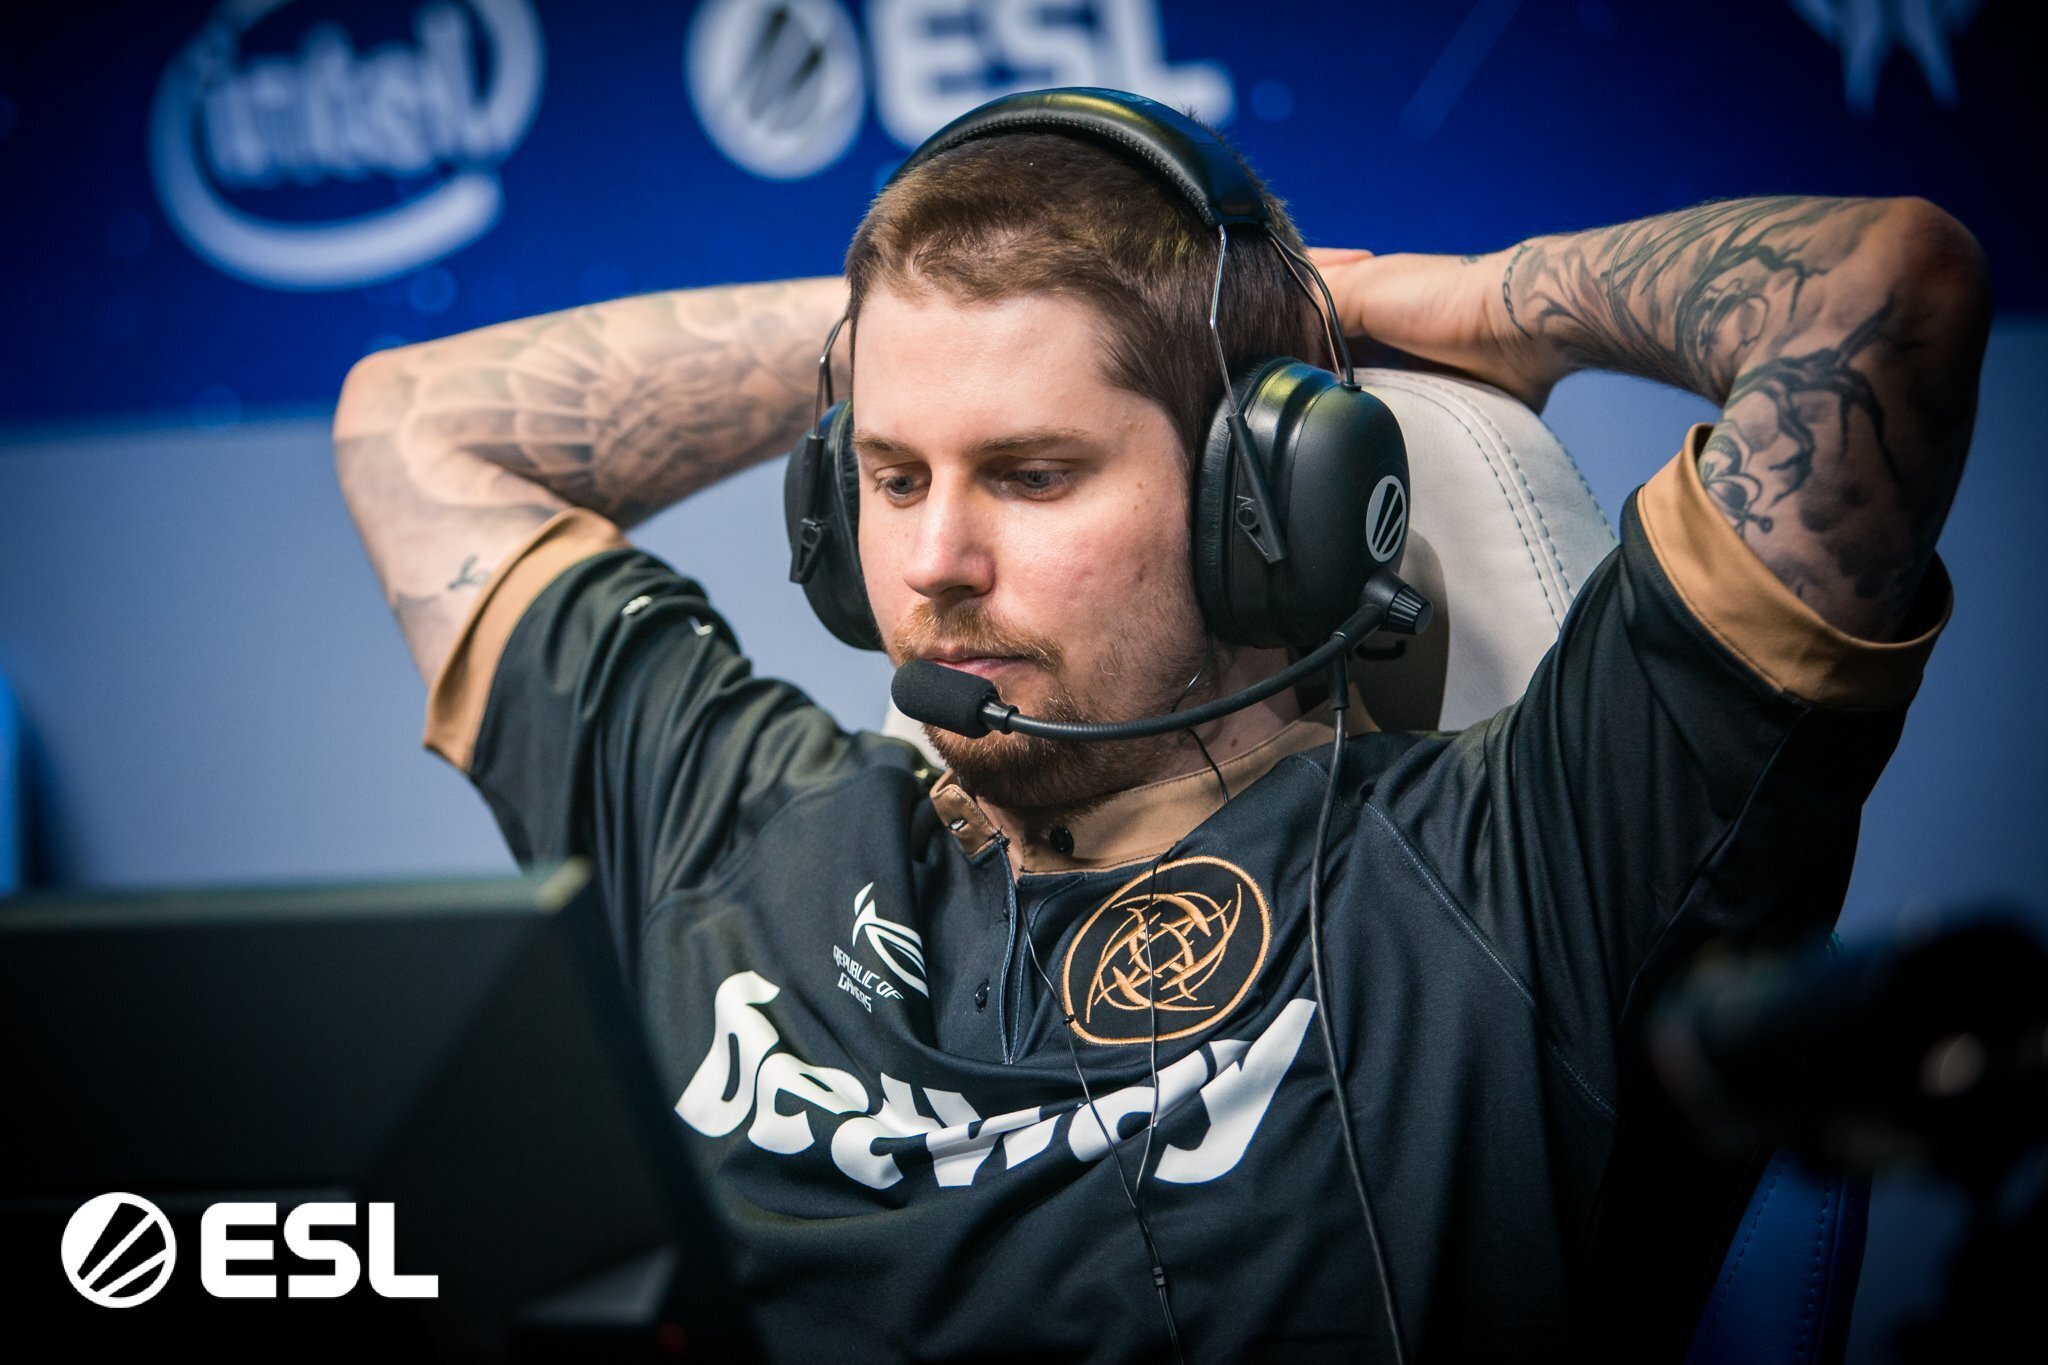 dennis moves to an inactive role after more than a year with NiP (Photo courtesy of ESL)